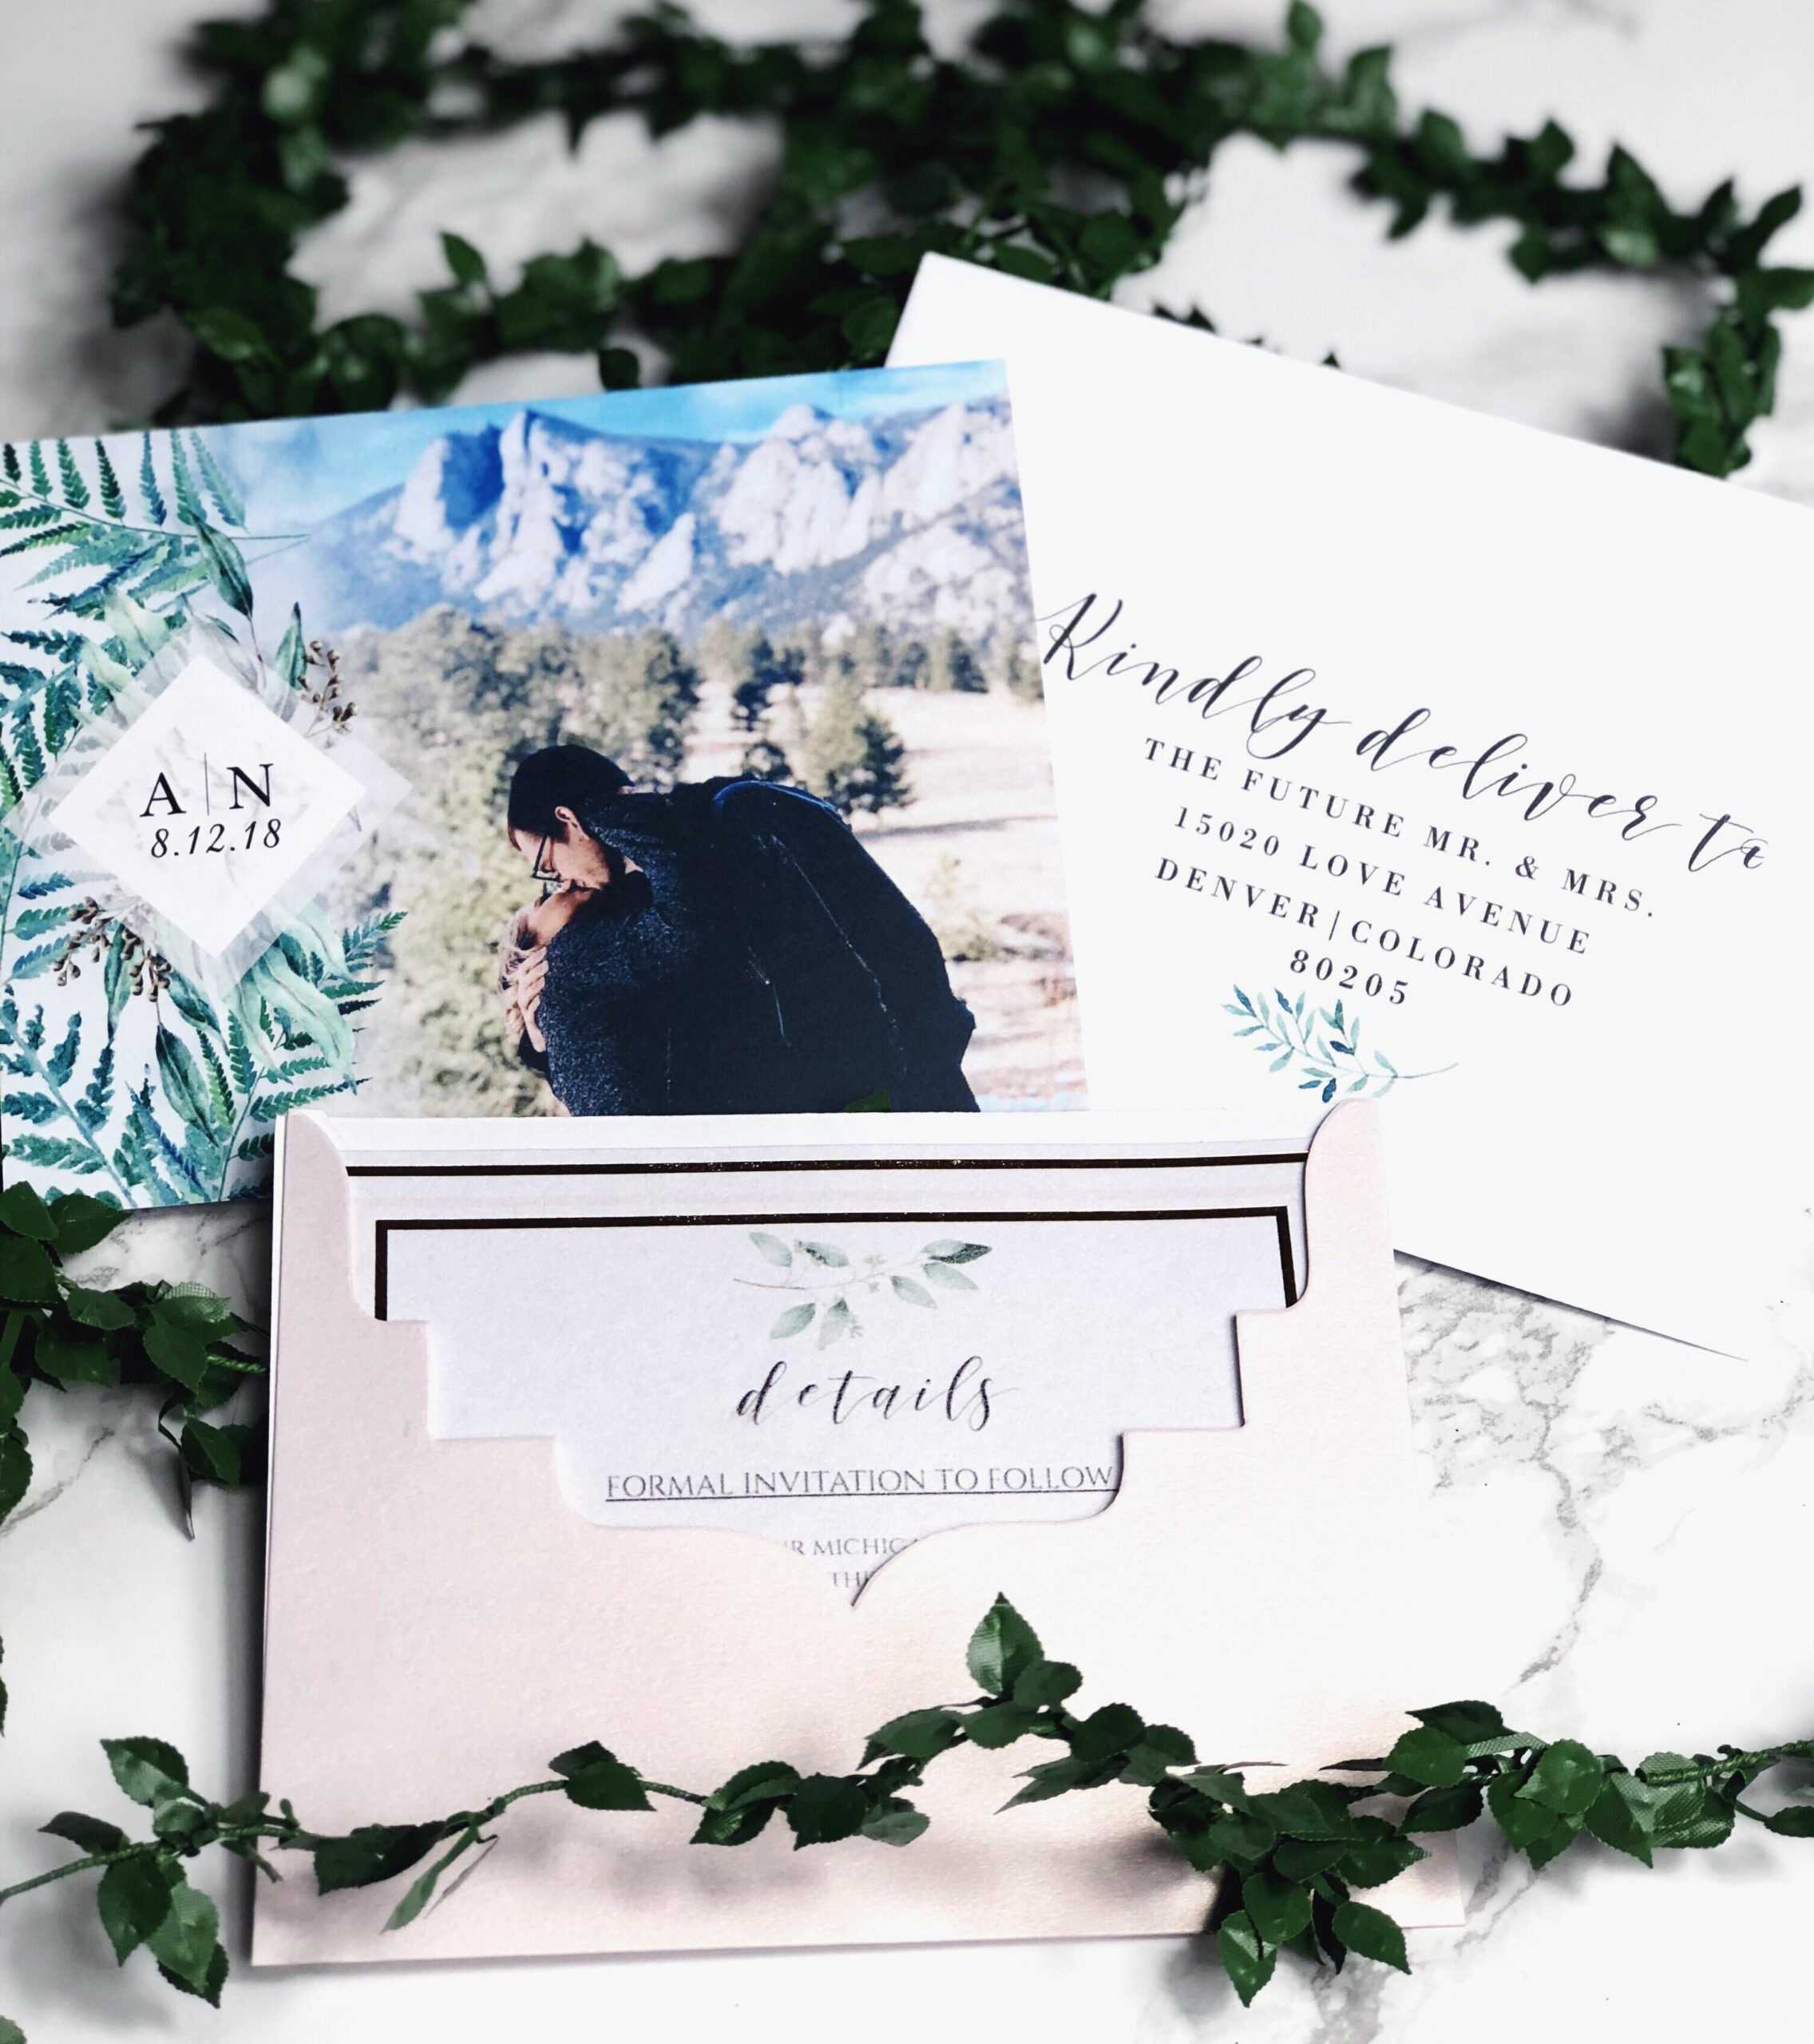 Our Save The Dates! Photo From Vistaprint, Envelope Intended For Michaels Place Card Template